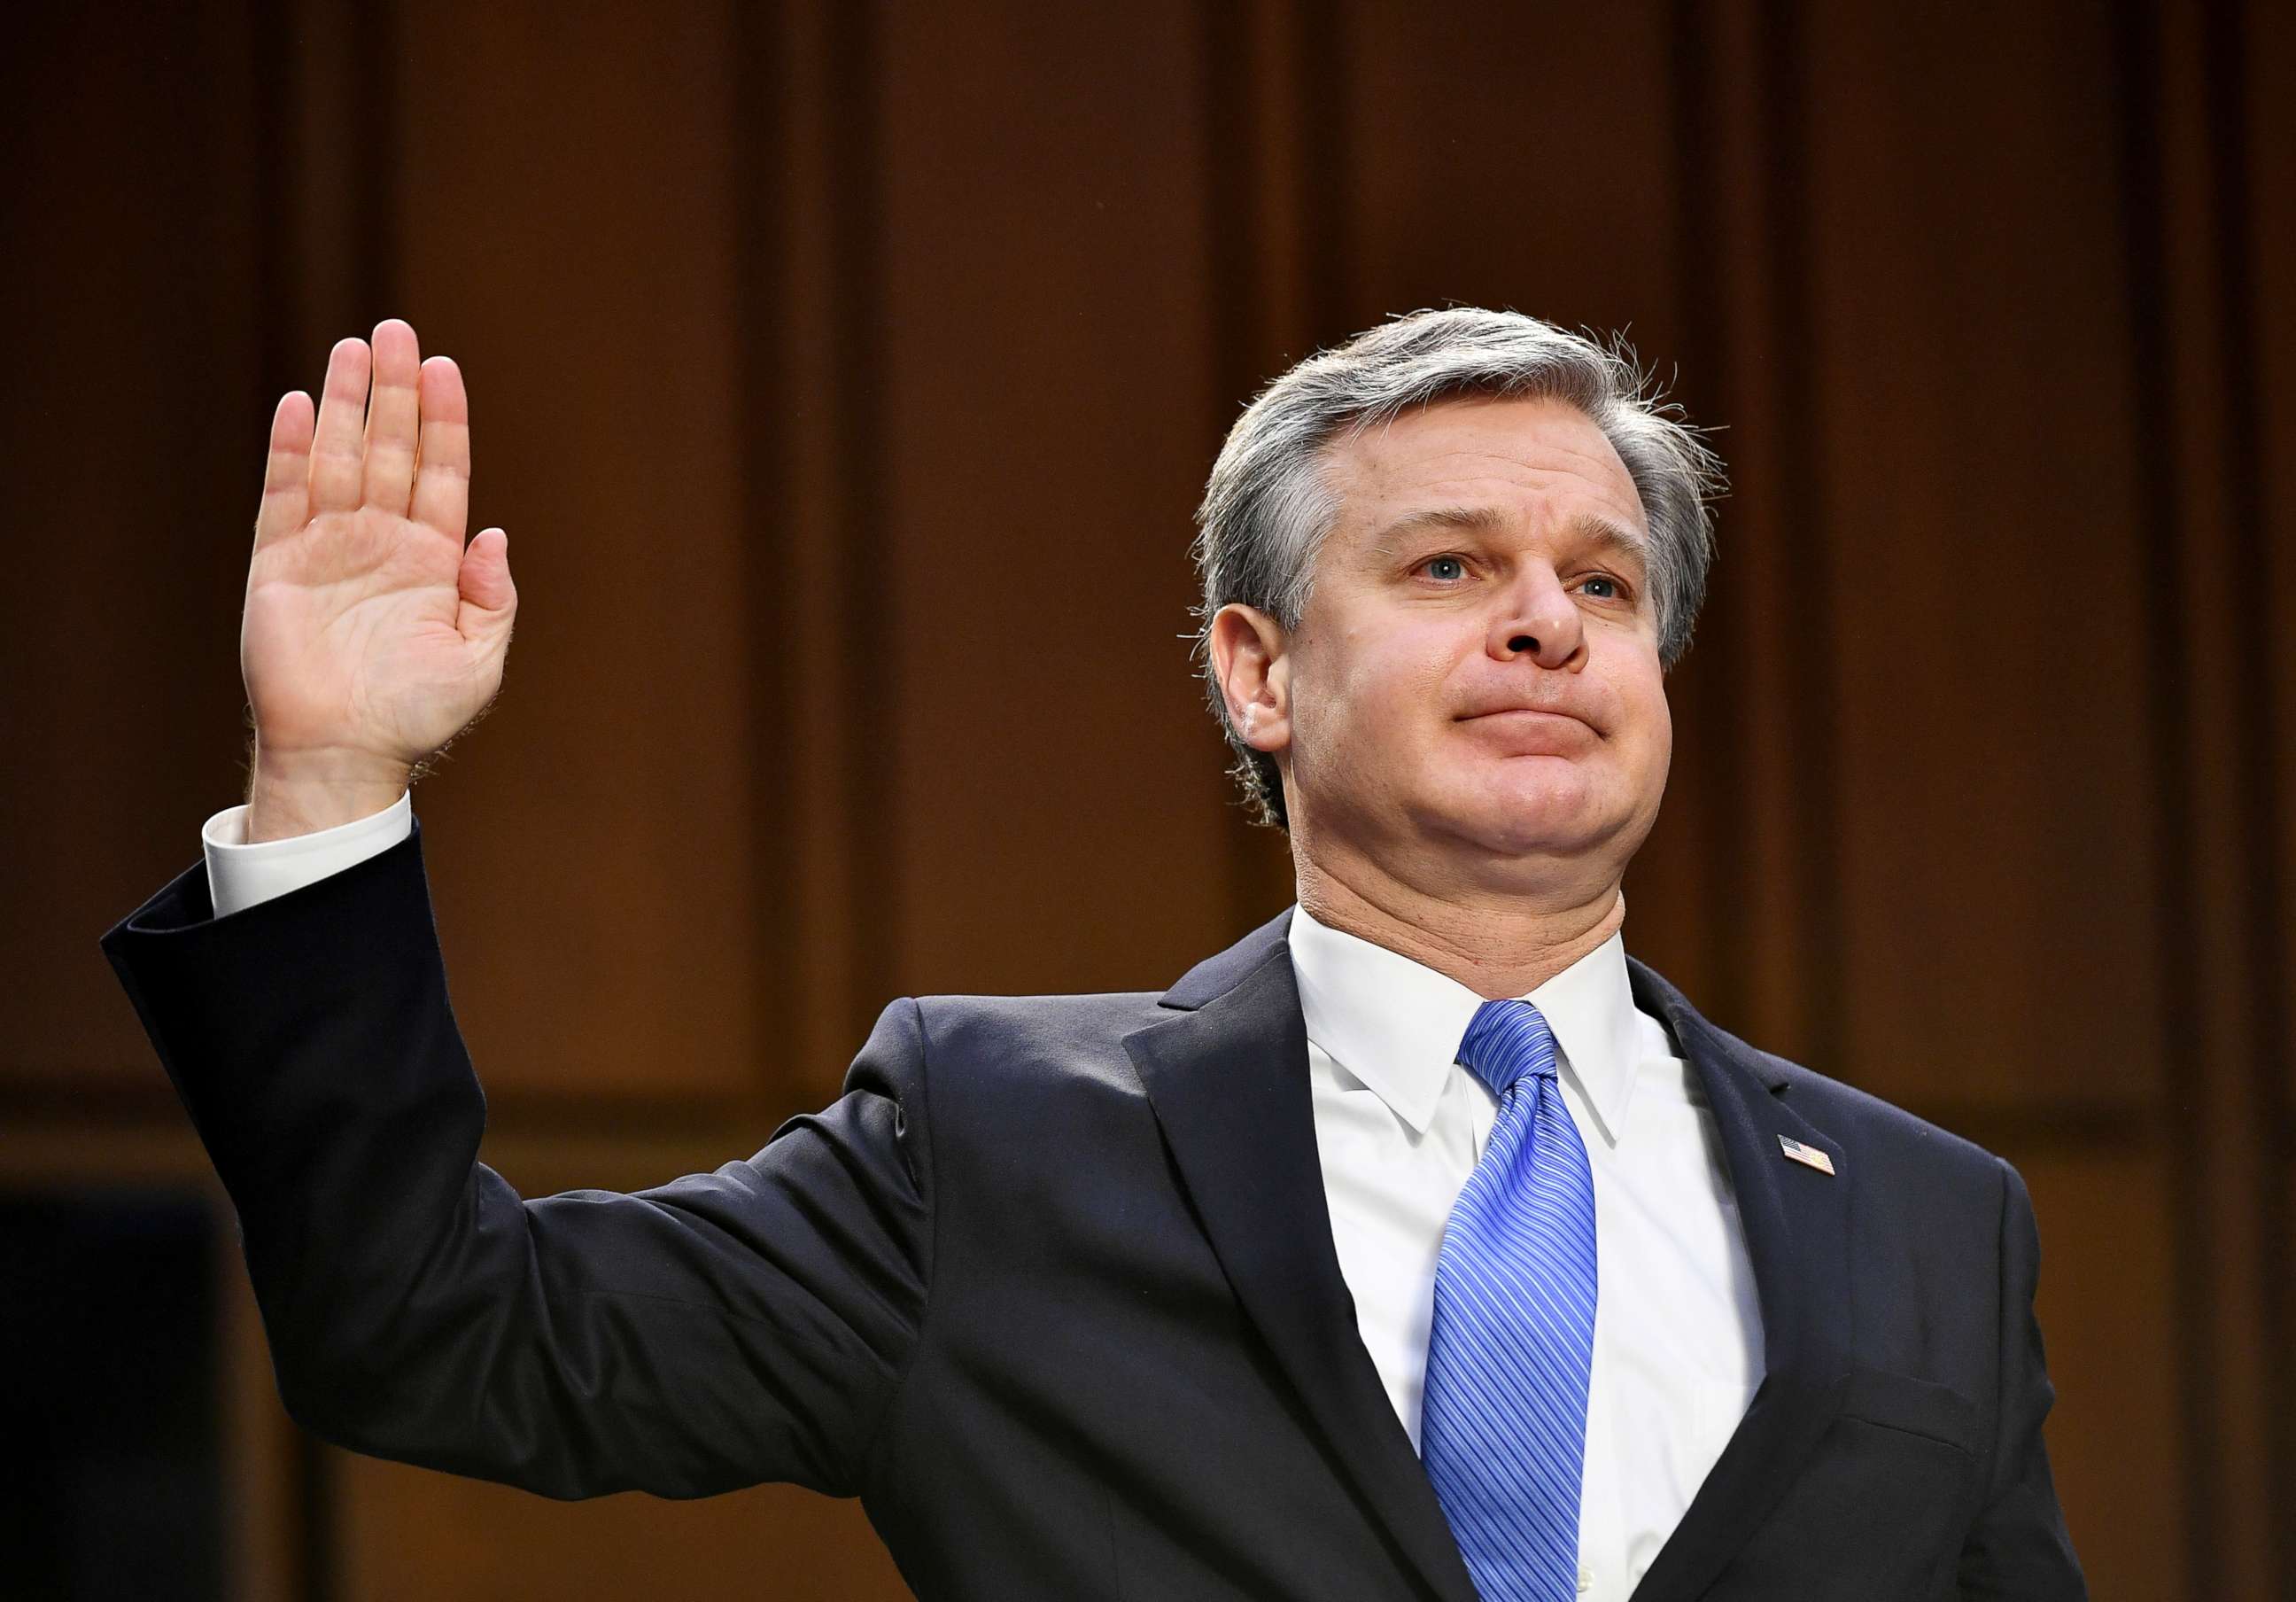 PHOTO: FBI Director Christopher Wray testifies before the Senate Judiciary Committee about the January 6th attack on the U.S. Capitol, on Capitol Hill on March 2, 2021 in Washington, DC.